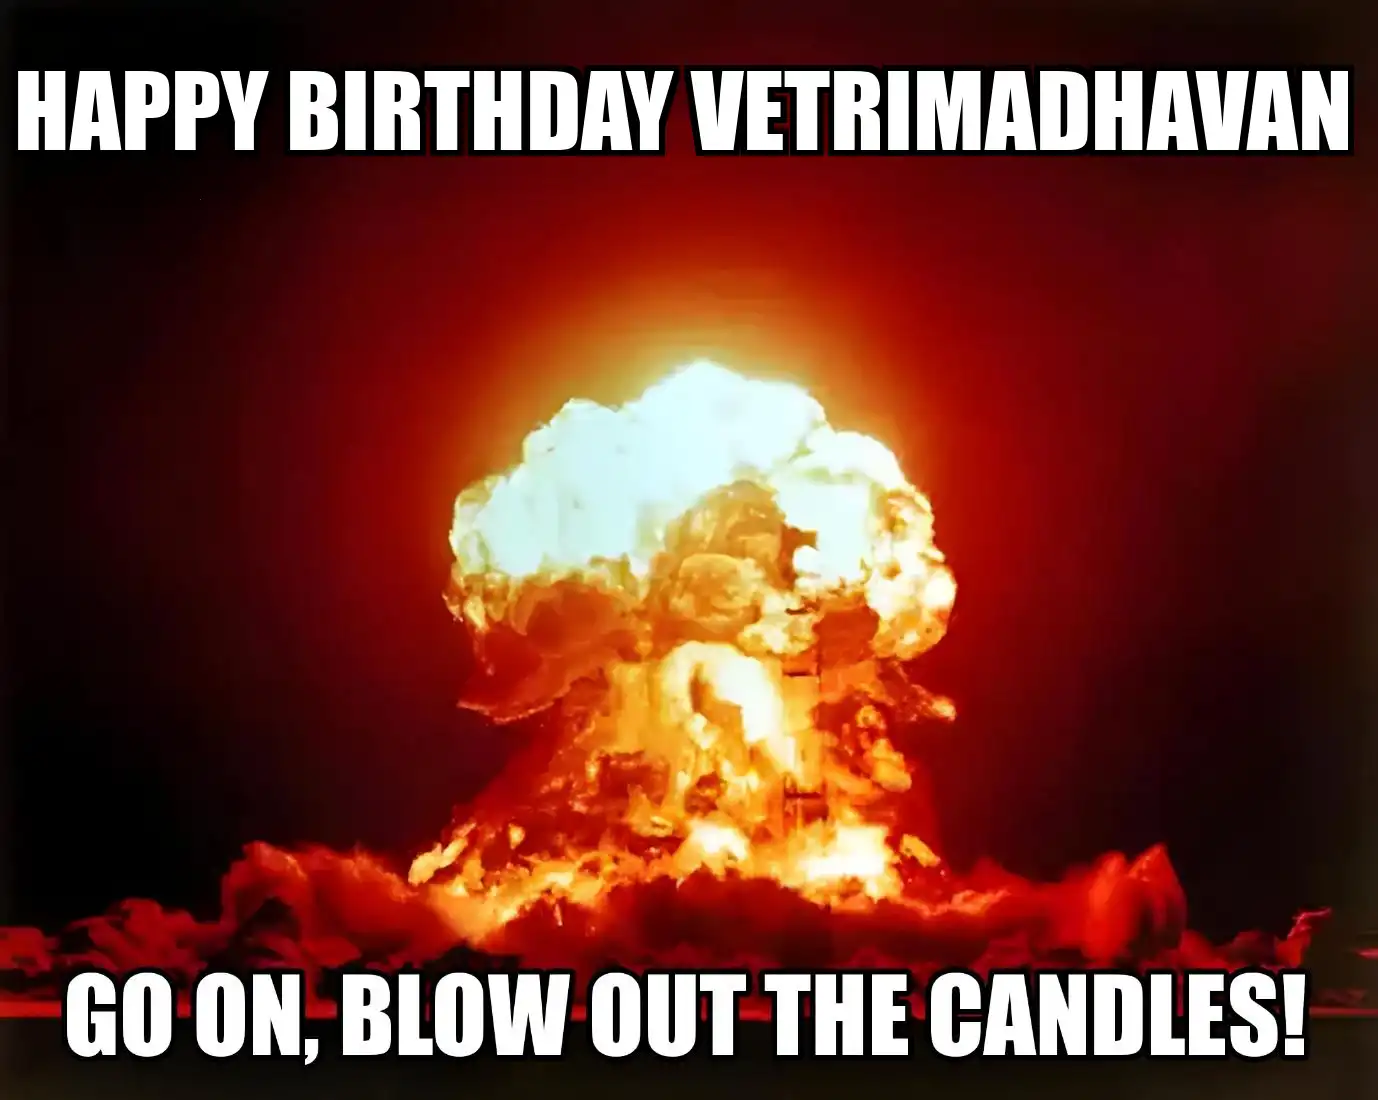 Happy Birthday Vetrimadhavan Go On Blow Out The Candles Meme